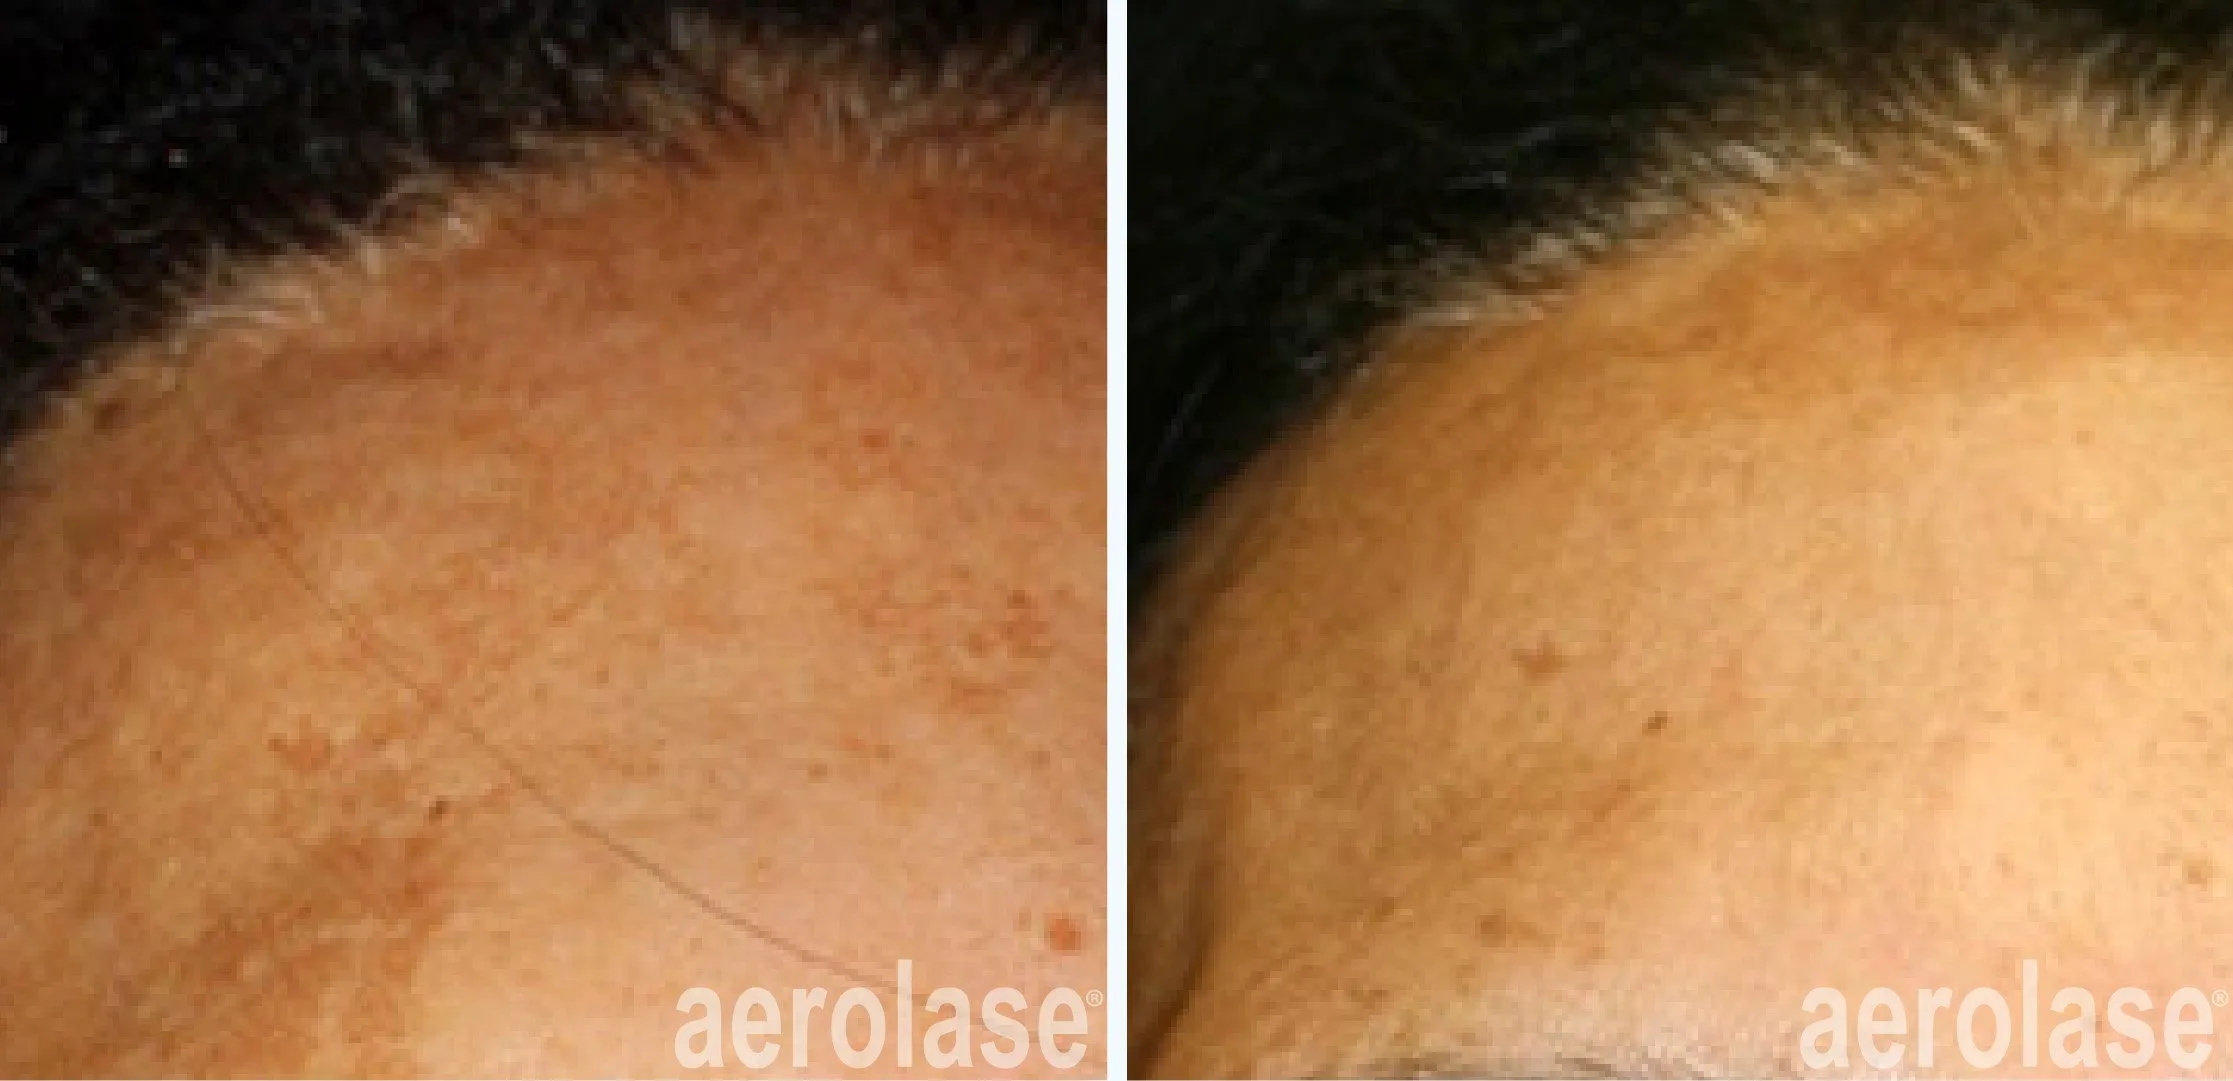 111melasma-3-cheryl-burgess-before-and-after